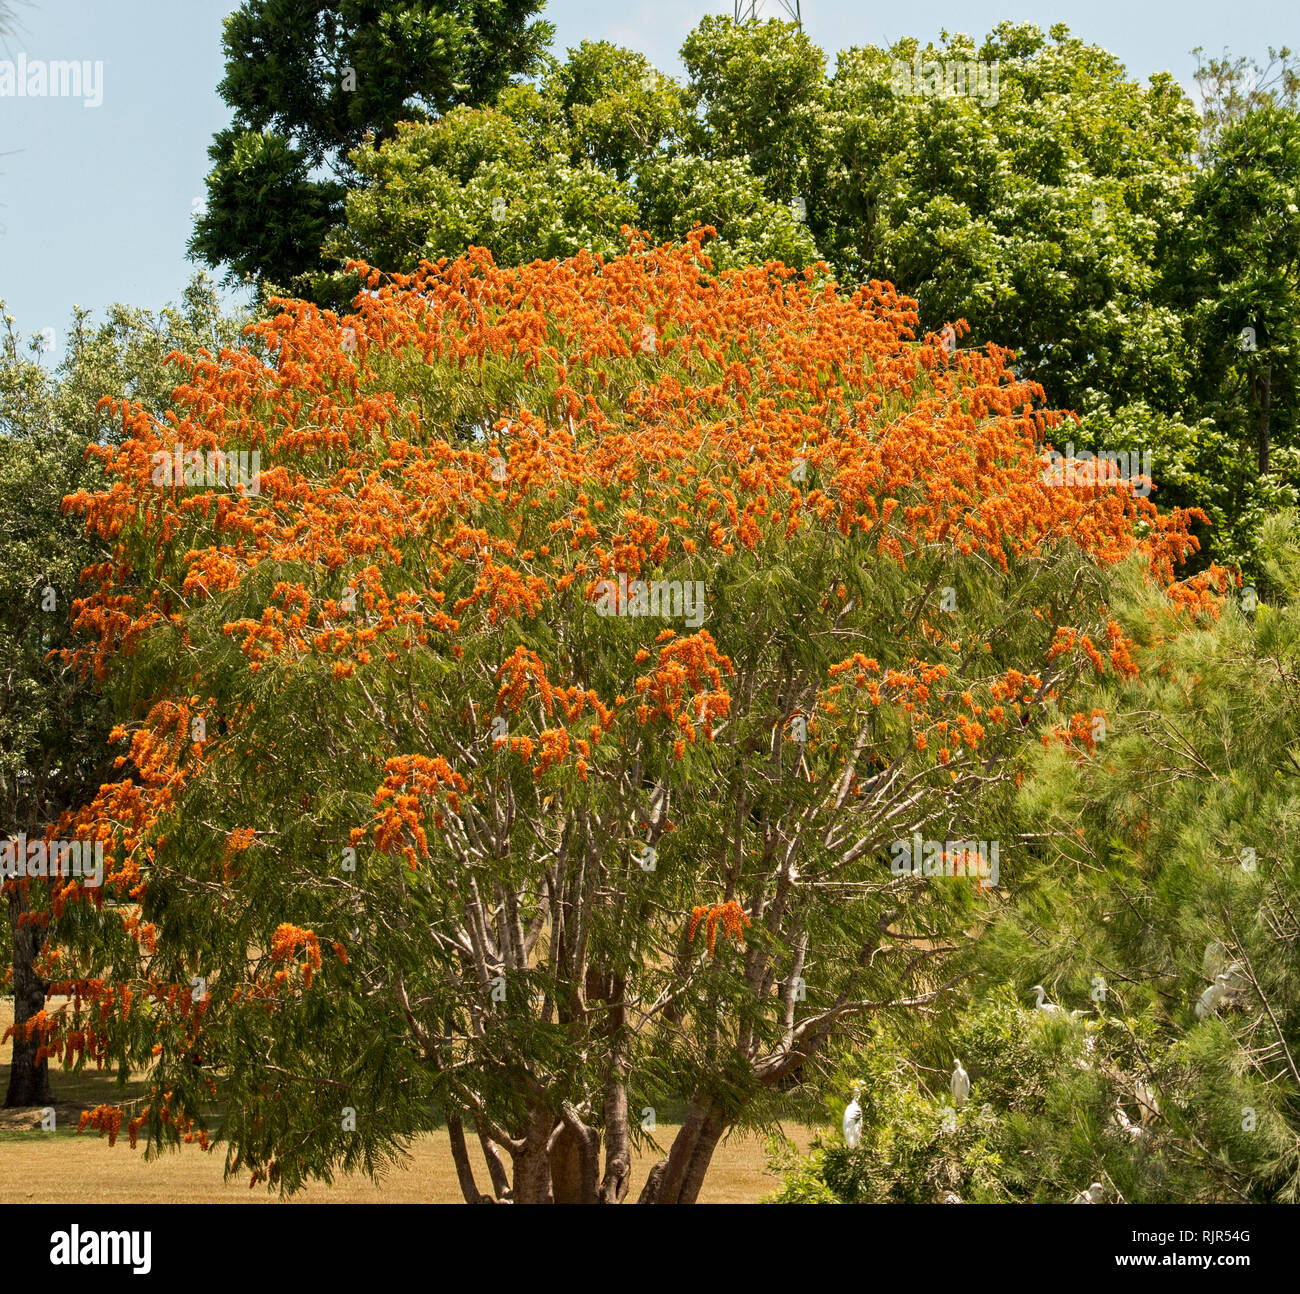 Colvillea racemosa, unusual deciduous tree, cloaked with masses of spectacular vivid orange flowers and green leaves in Queensland Australia Stock Photo